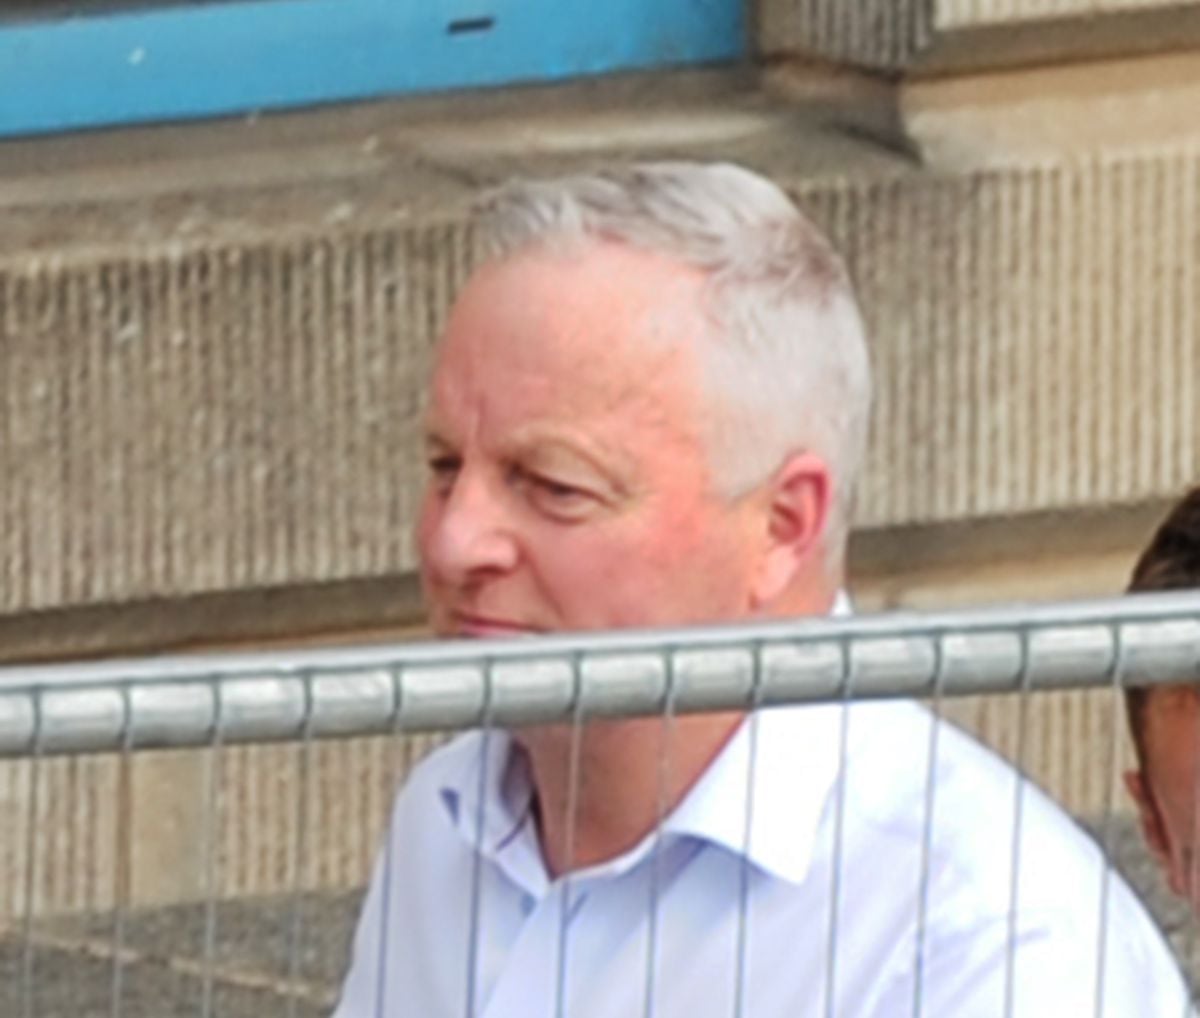 Stephen Roberts outside Wolverhampton Crown Court, where the case is being heard